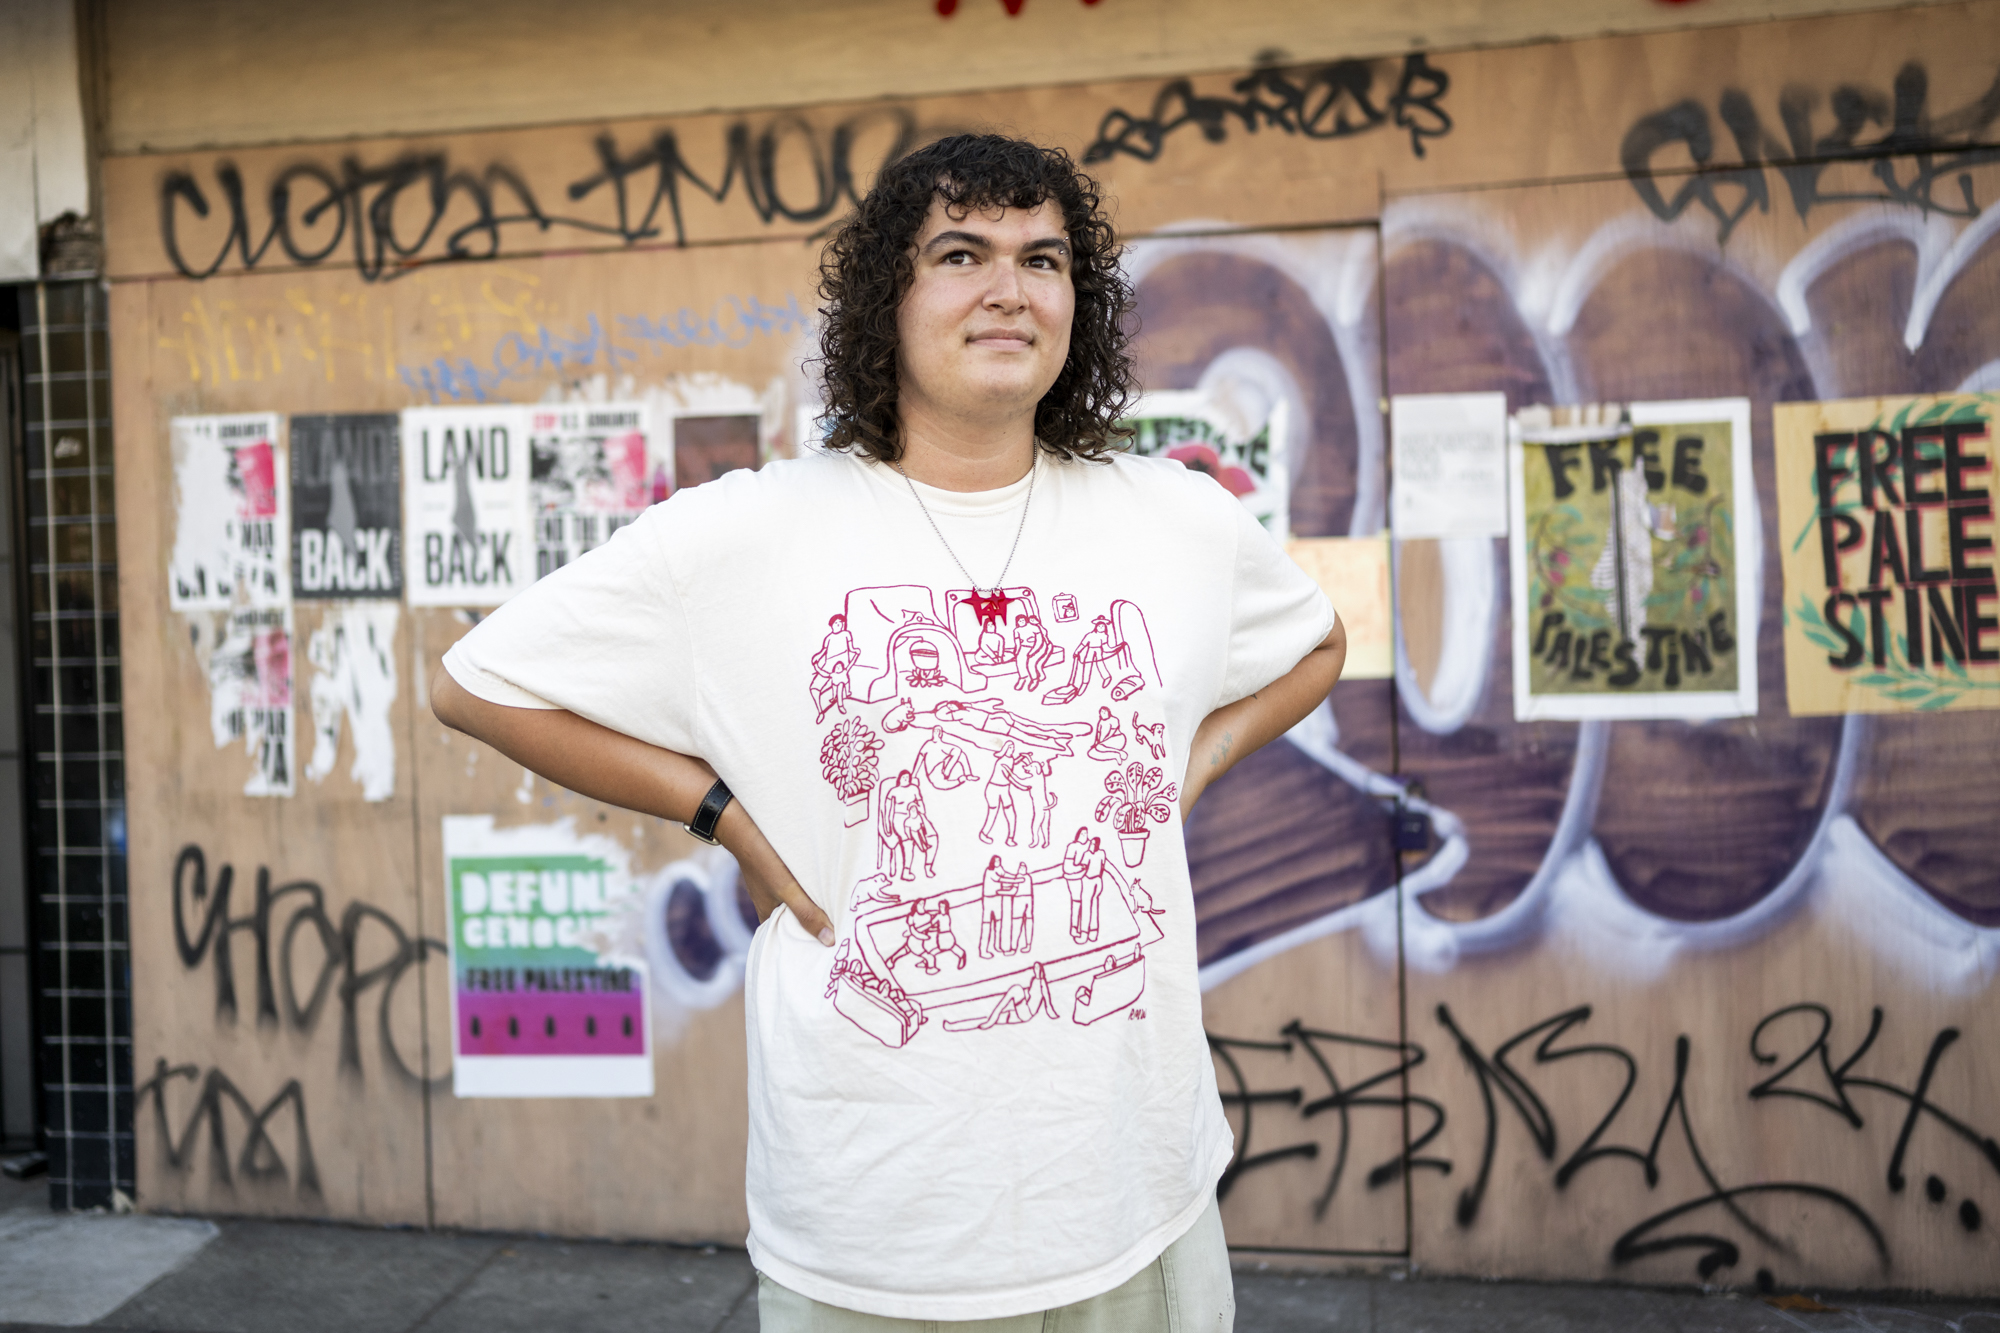 Person stands with hands on hips in front of graffitied storefront